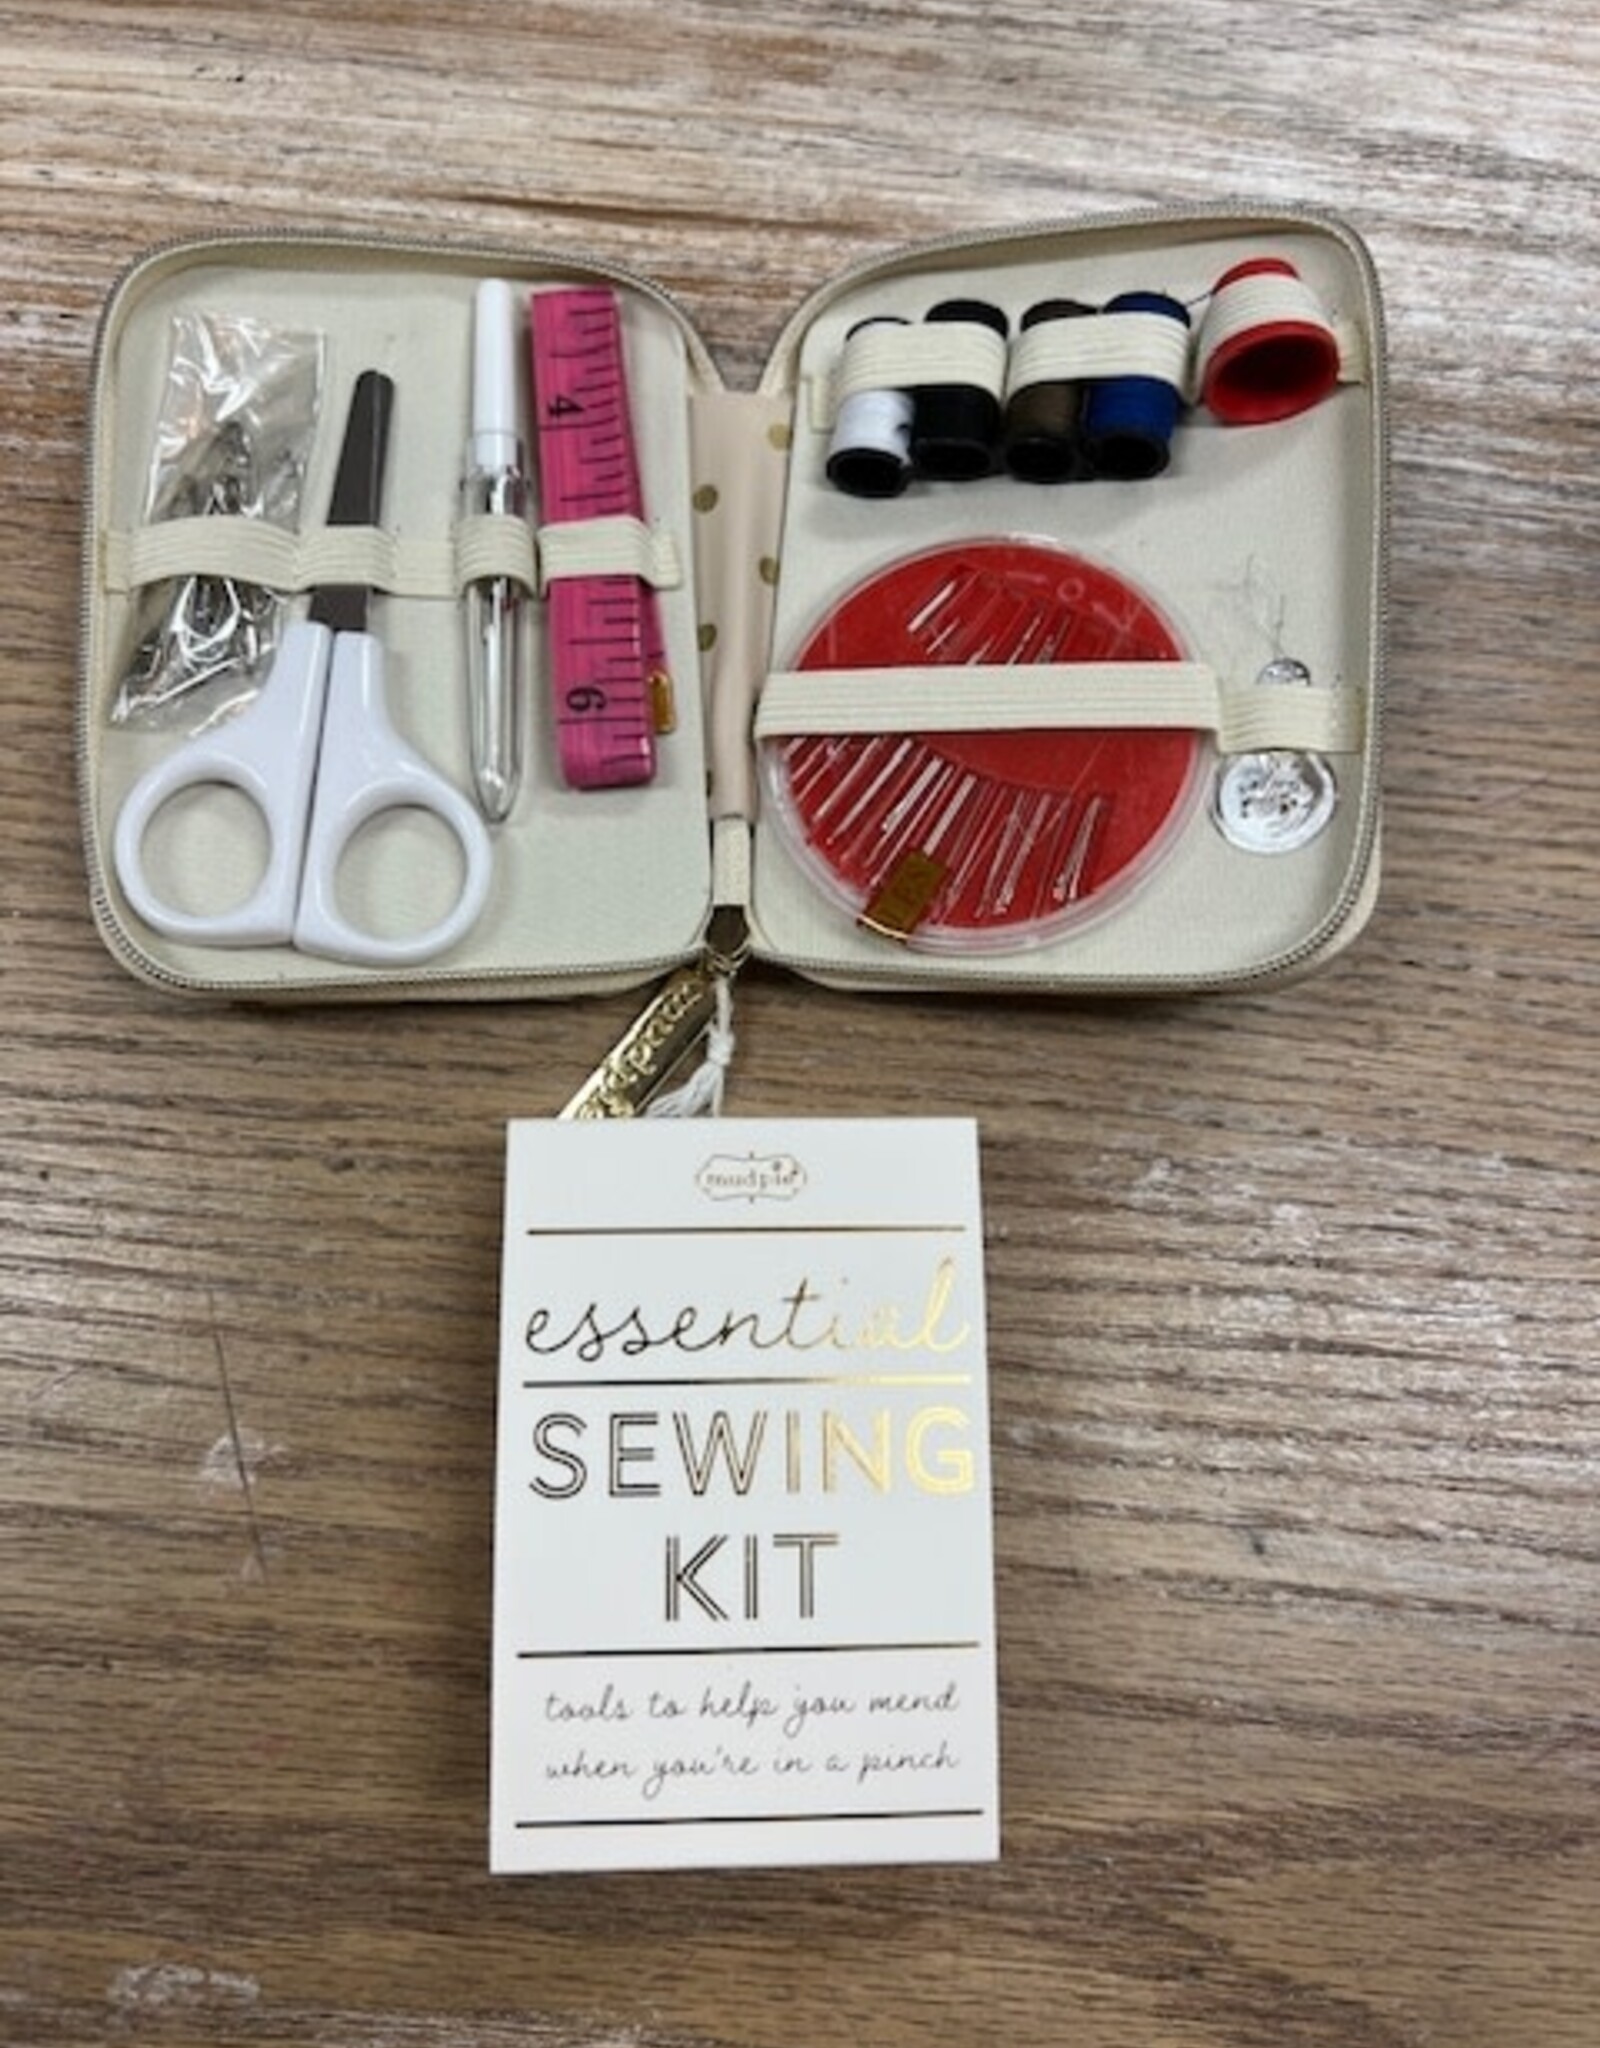 Other Sewing Kit